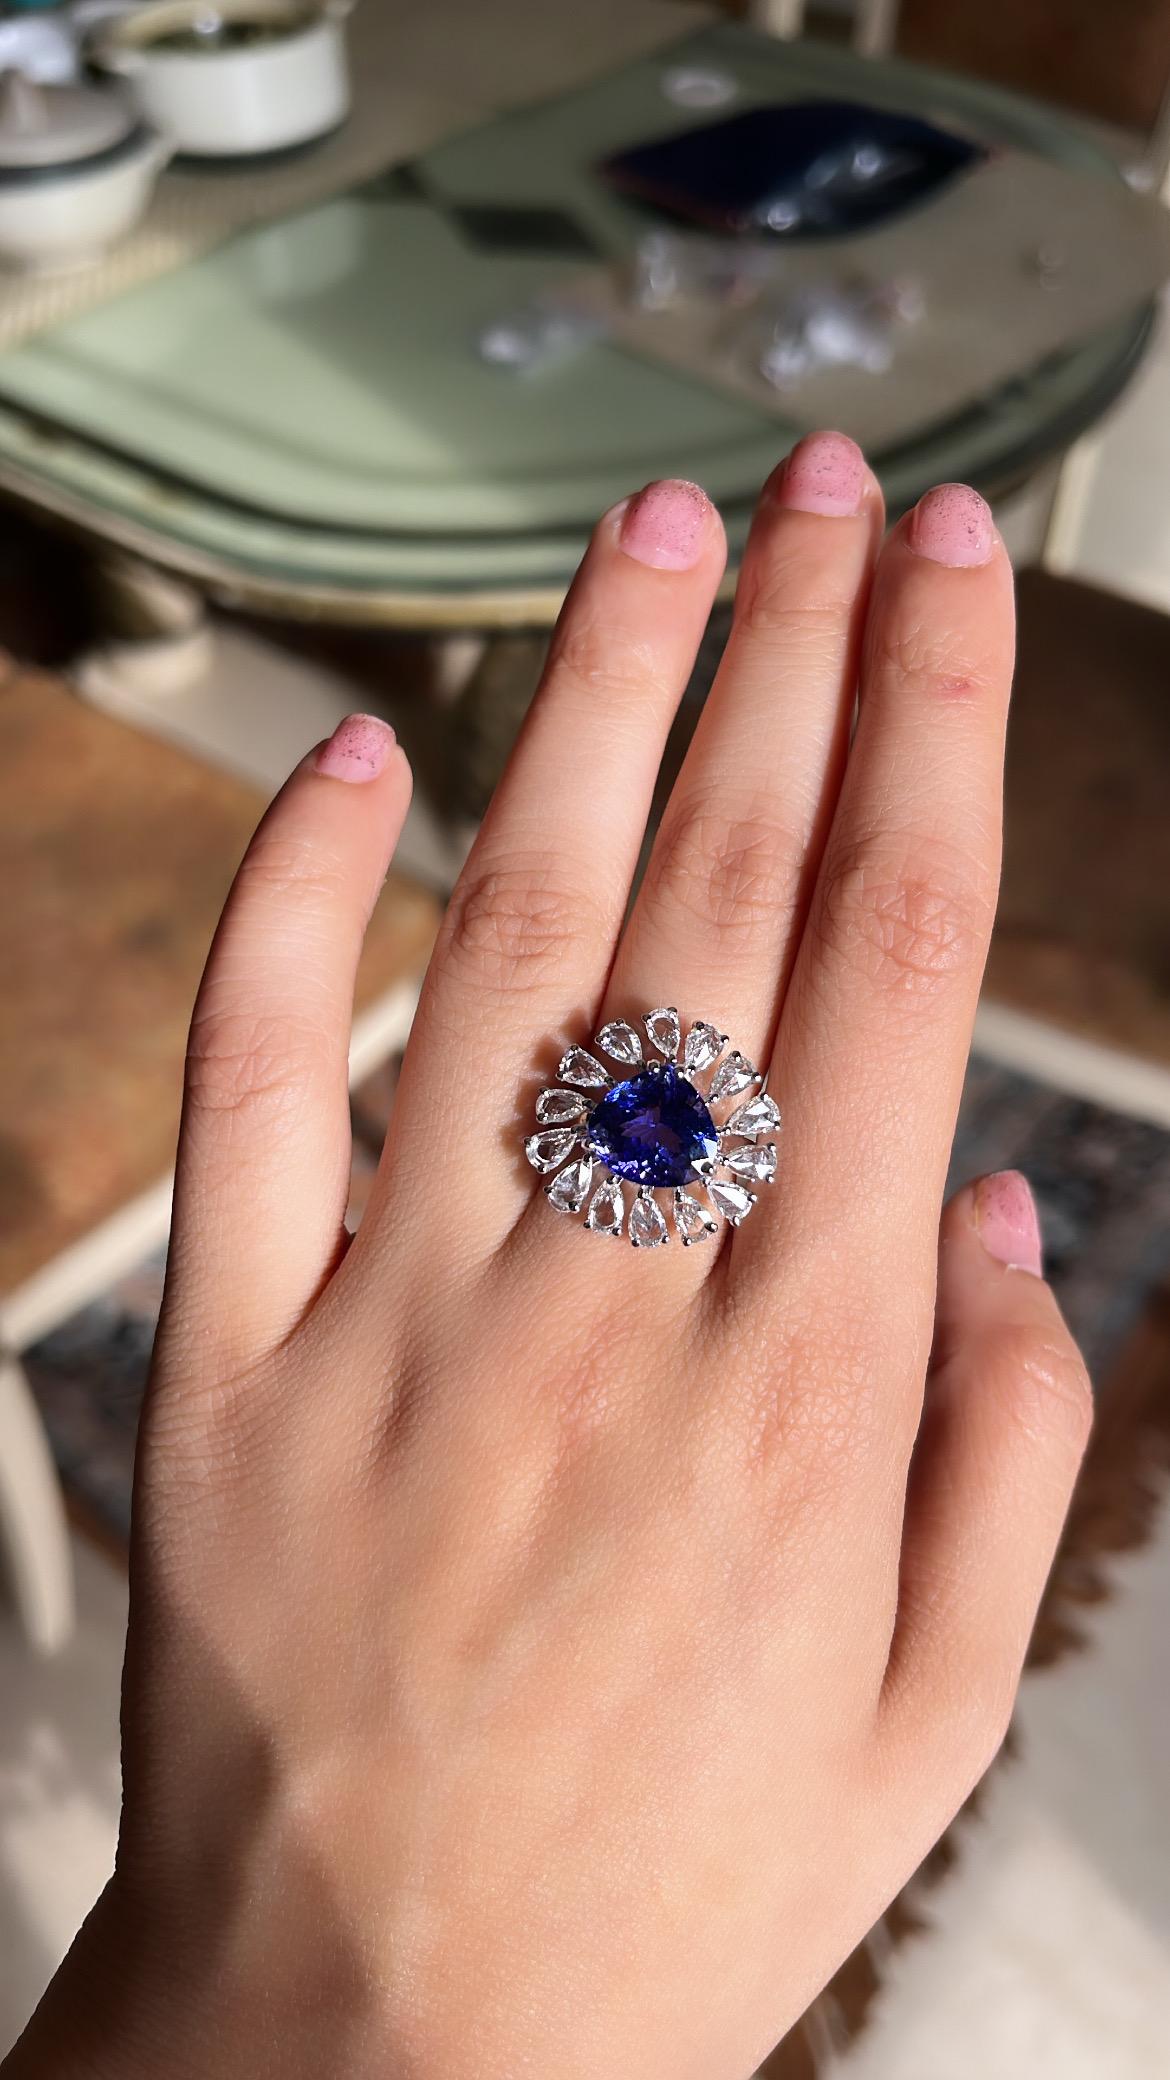 A very gorgeous and one of a kind, Tanzanite Cocktail/ Engagement Ring set in 18K White Gold & Diamonds. The weight of the Tanzanite is 5.48 carats. The Tanzanite is responsibly sourced from Tanzania and is free of any conflict. The weight of the